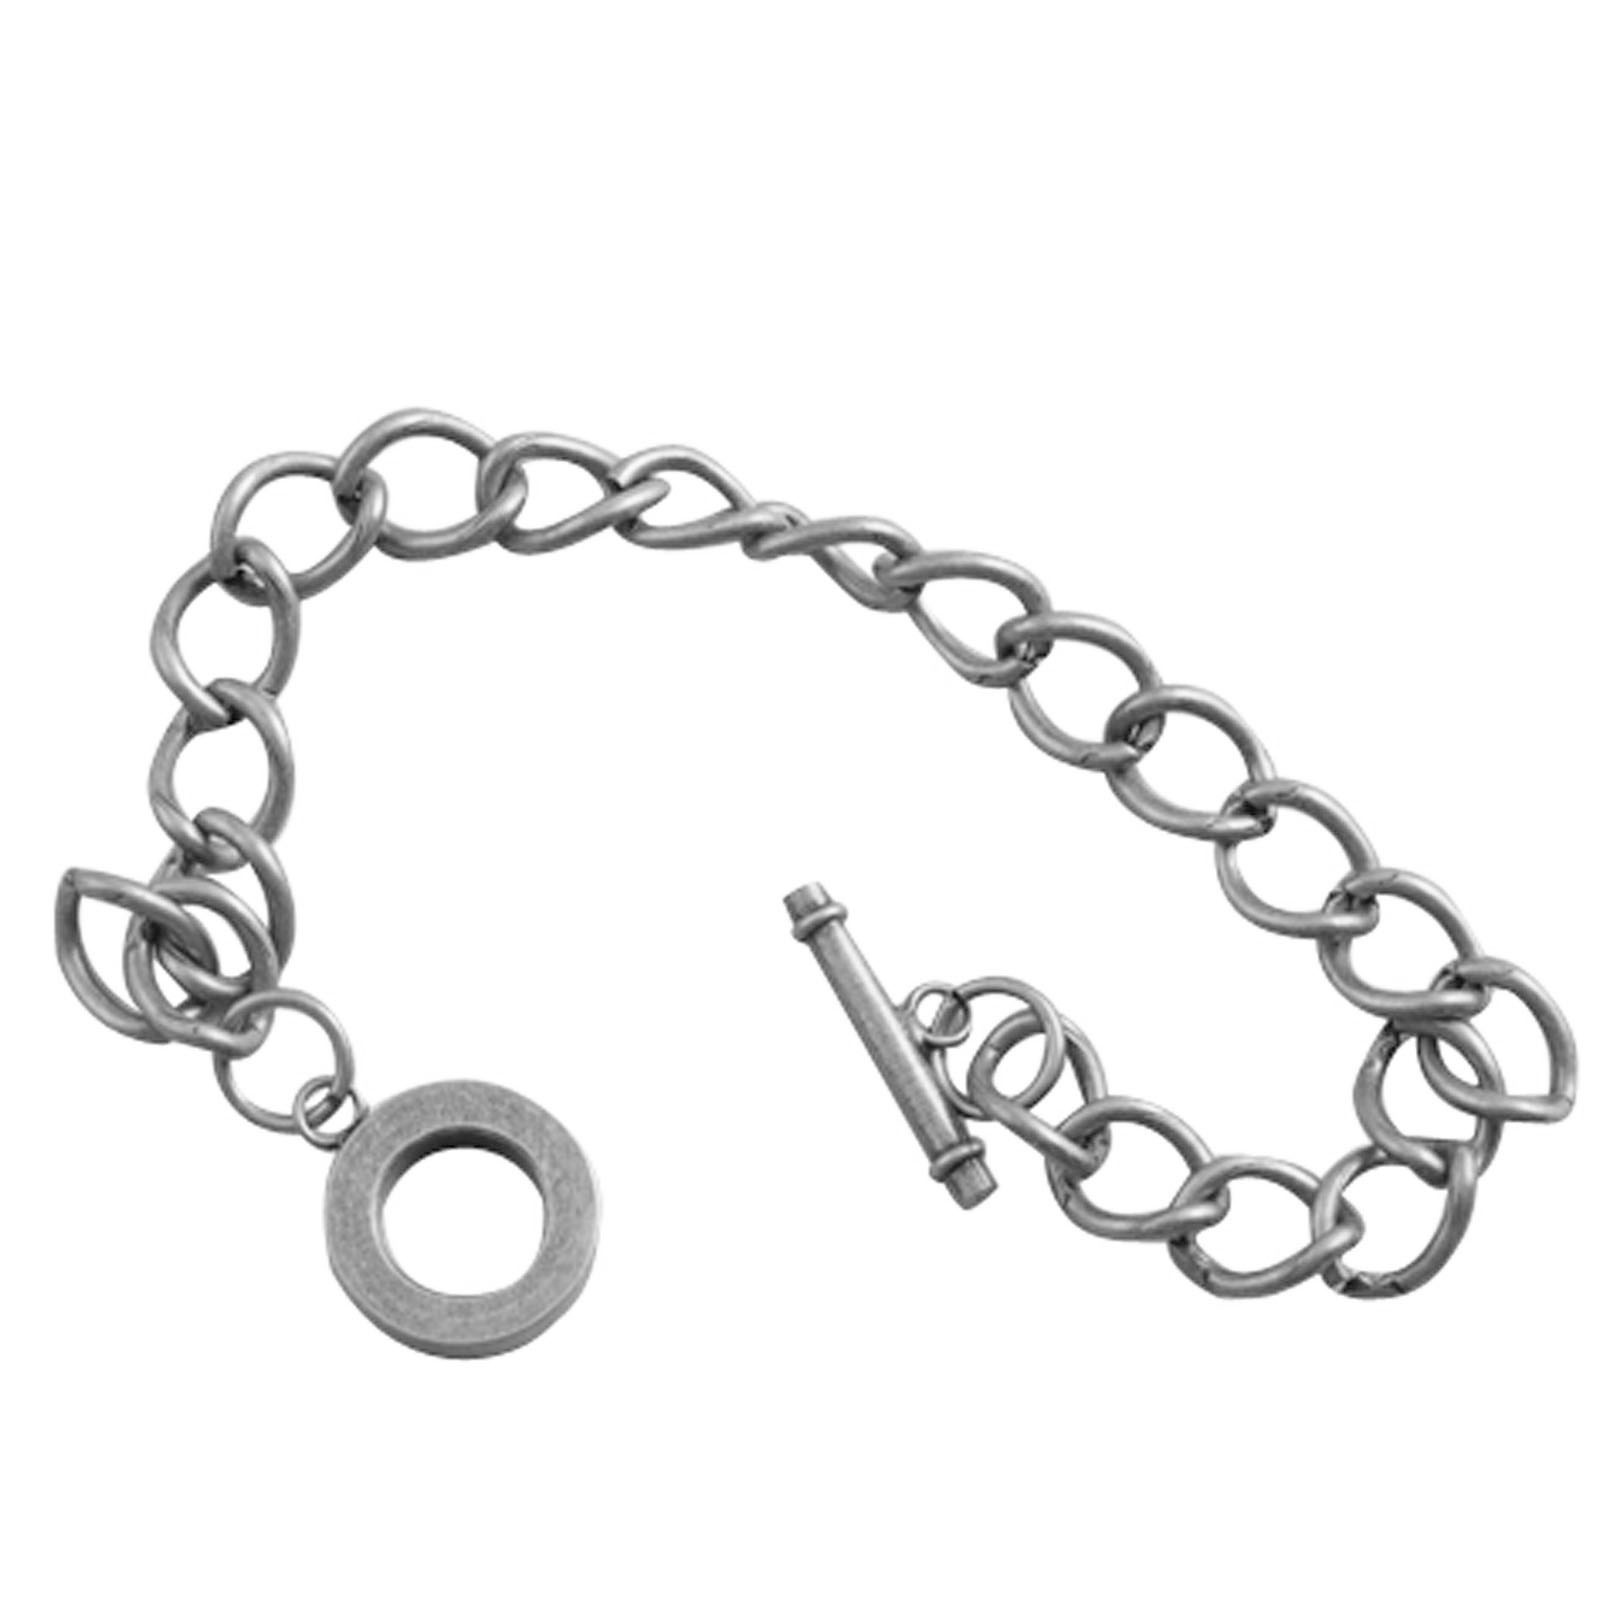 Darice • Chain bracelet w/toggle x1 ant. silver plated